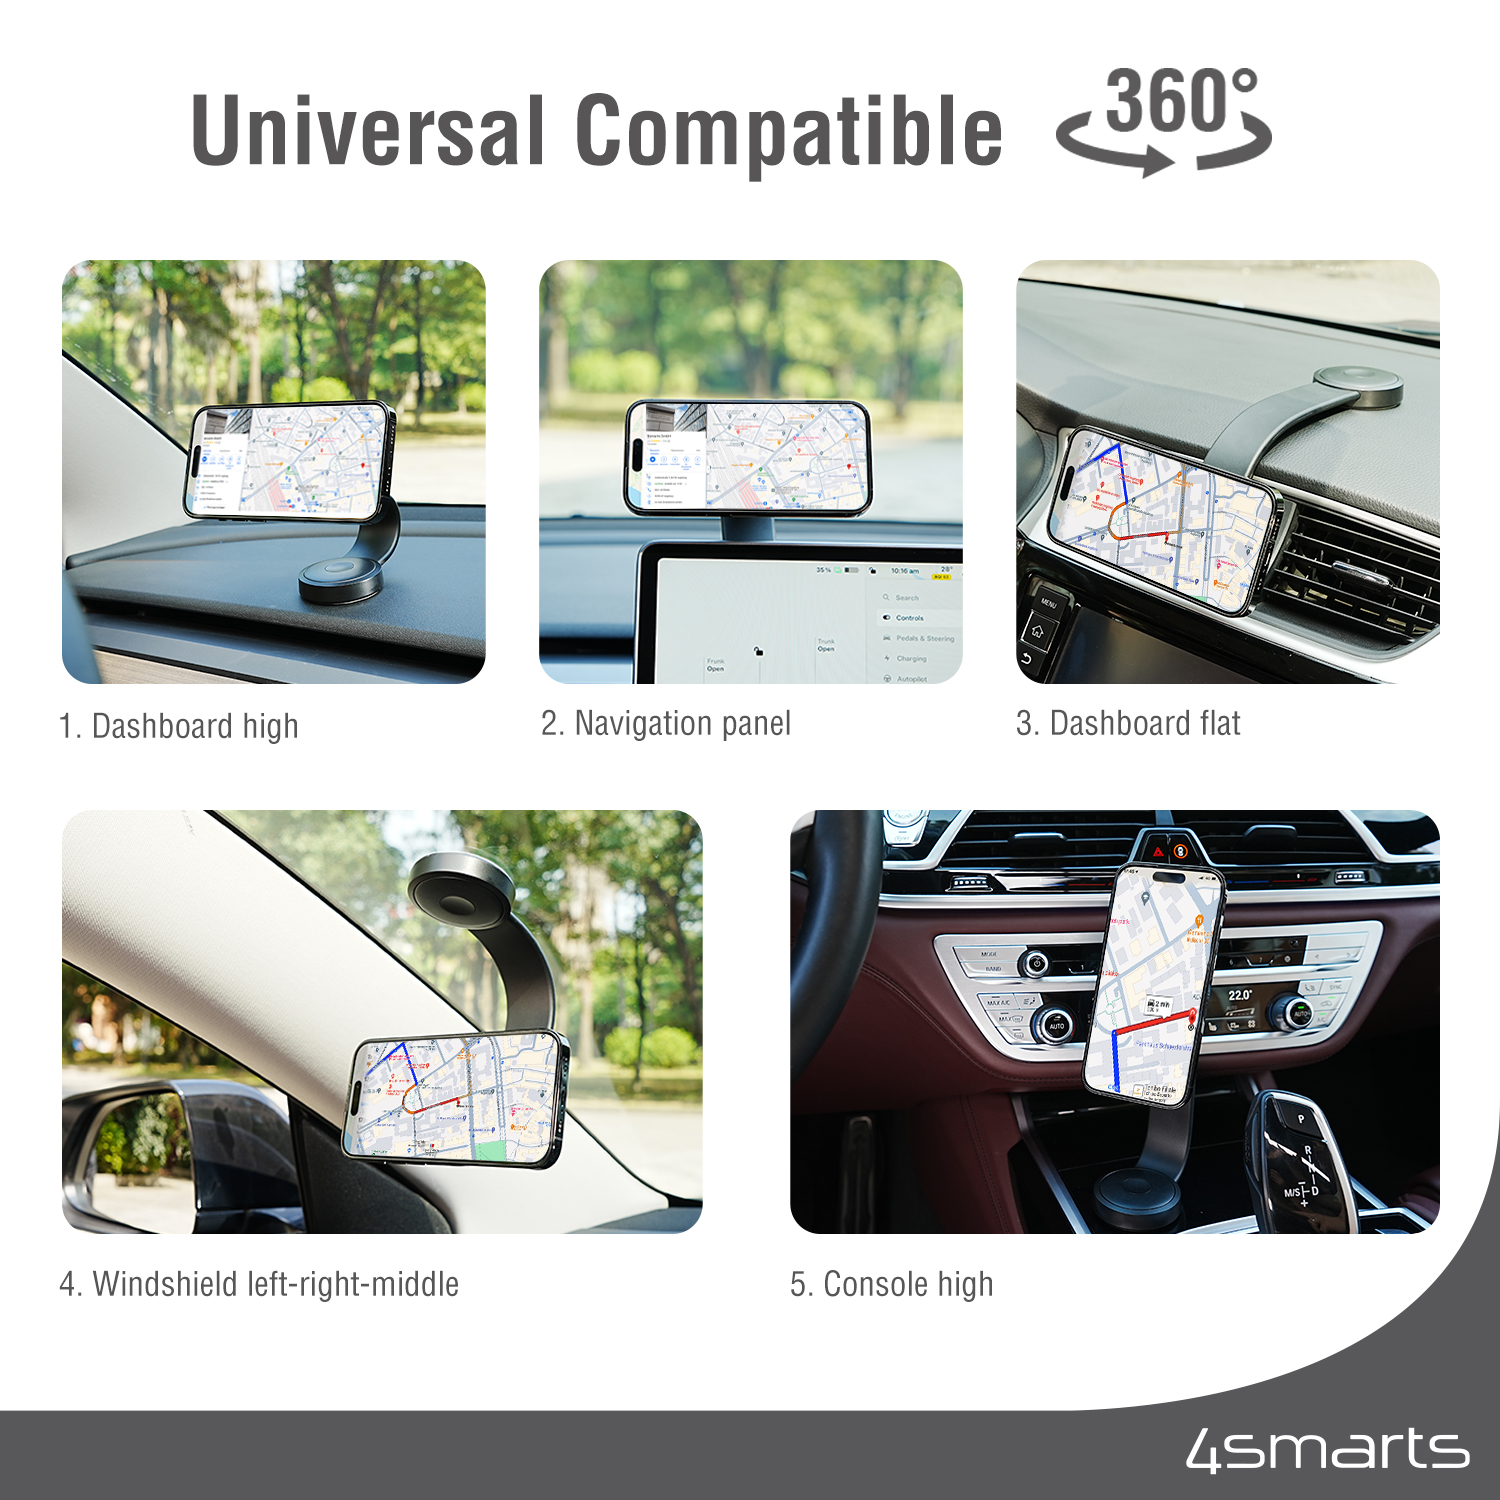 The 4smarts Qi2 Car Charging Set gives you a MagSafe car mount that can be attached to many places in your car.